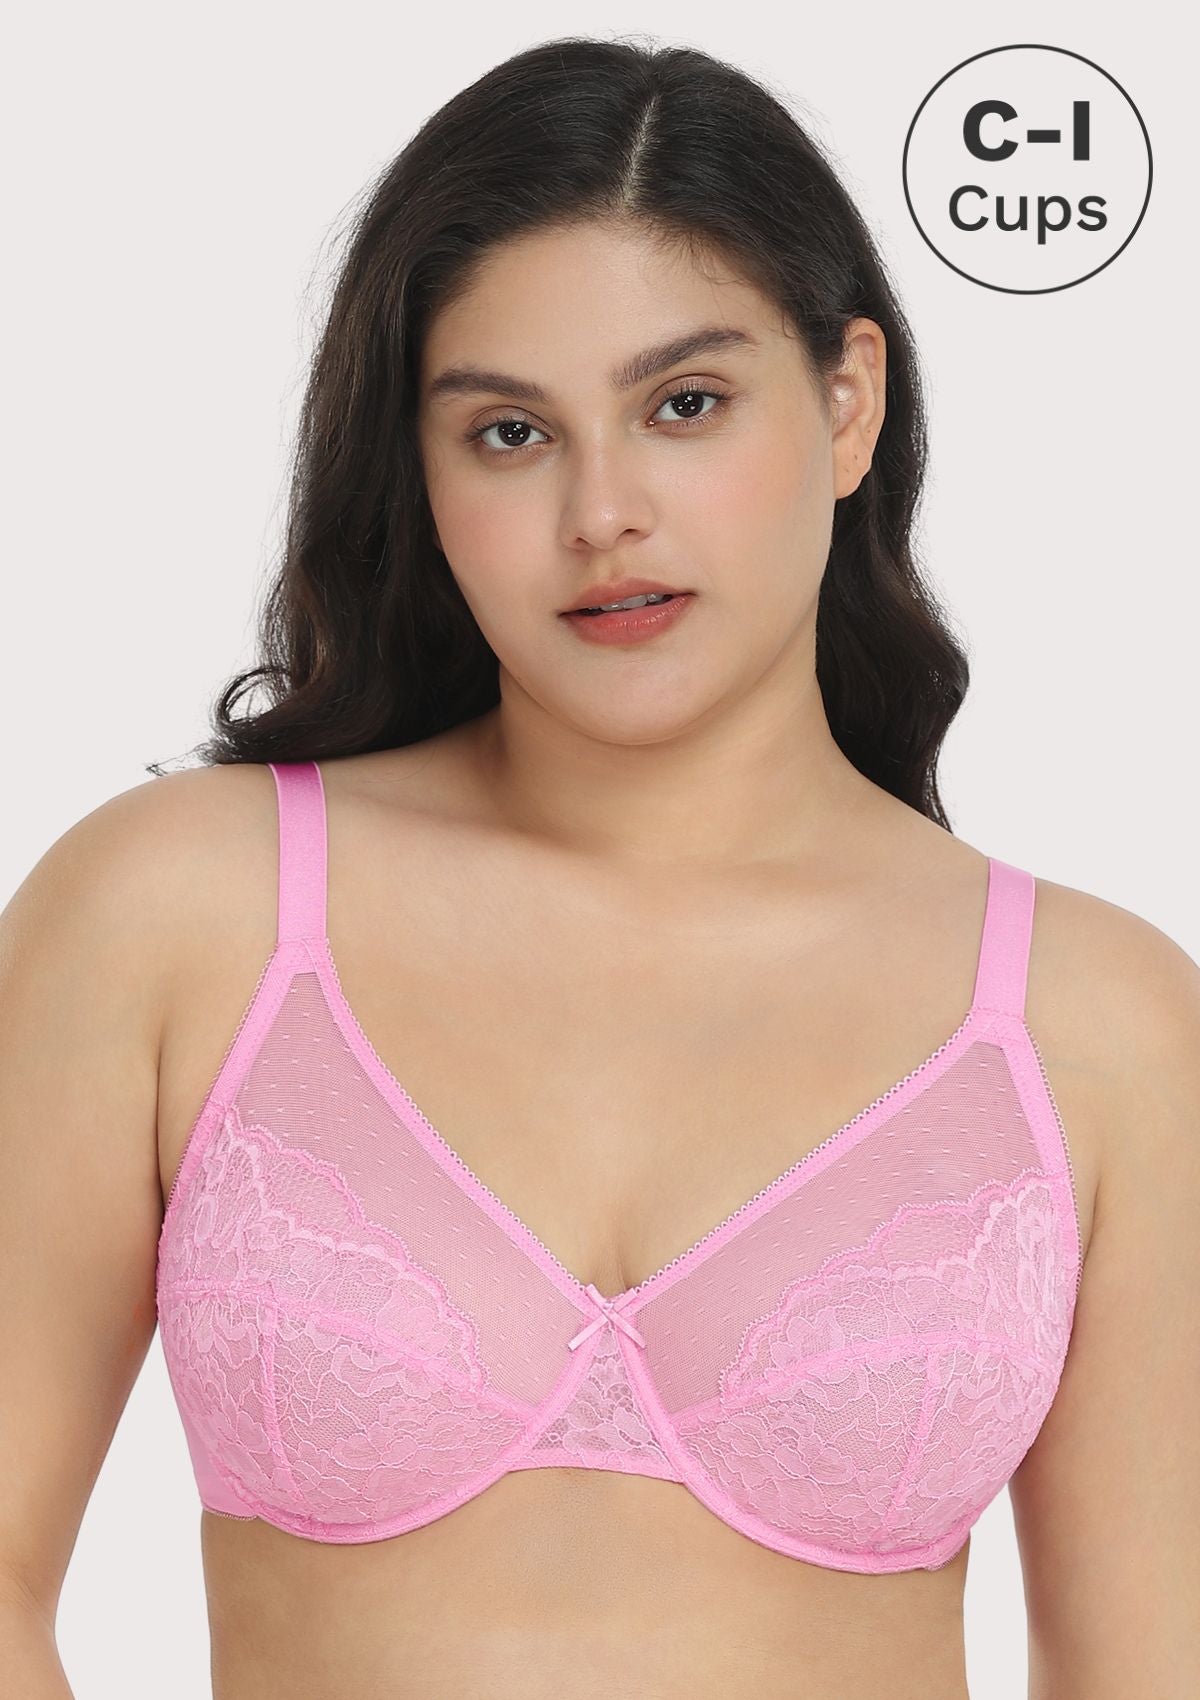 HSIA Enchante Lacy Bra: Comfy Sheer Lace Bra With Lift - Pink / 34 / C